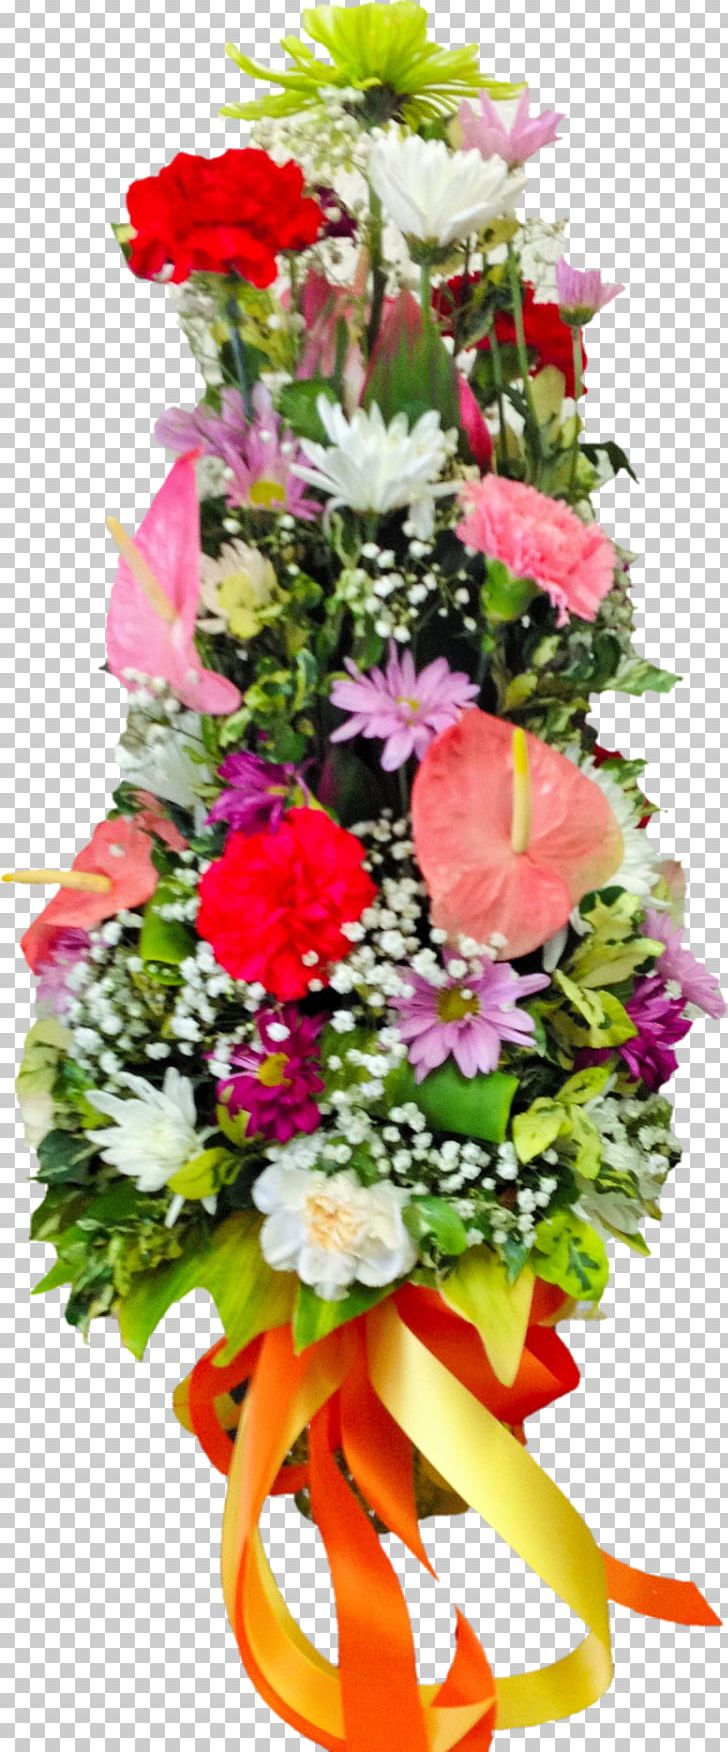 Flower Bouquet Birthday Cake Floral Design Cut Flowers PNG, Clipart, Anniversary, Annual Plant, Artificial Flower, Balloon, Birthday Free PNG Download